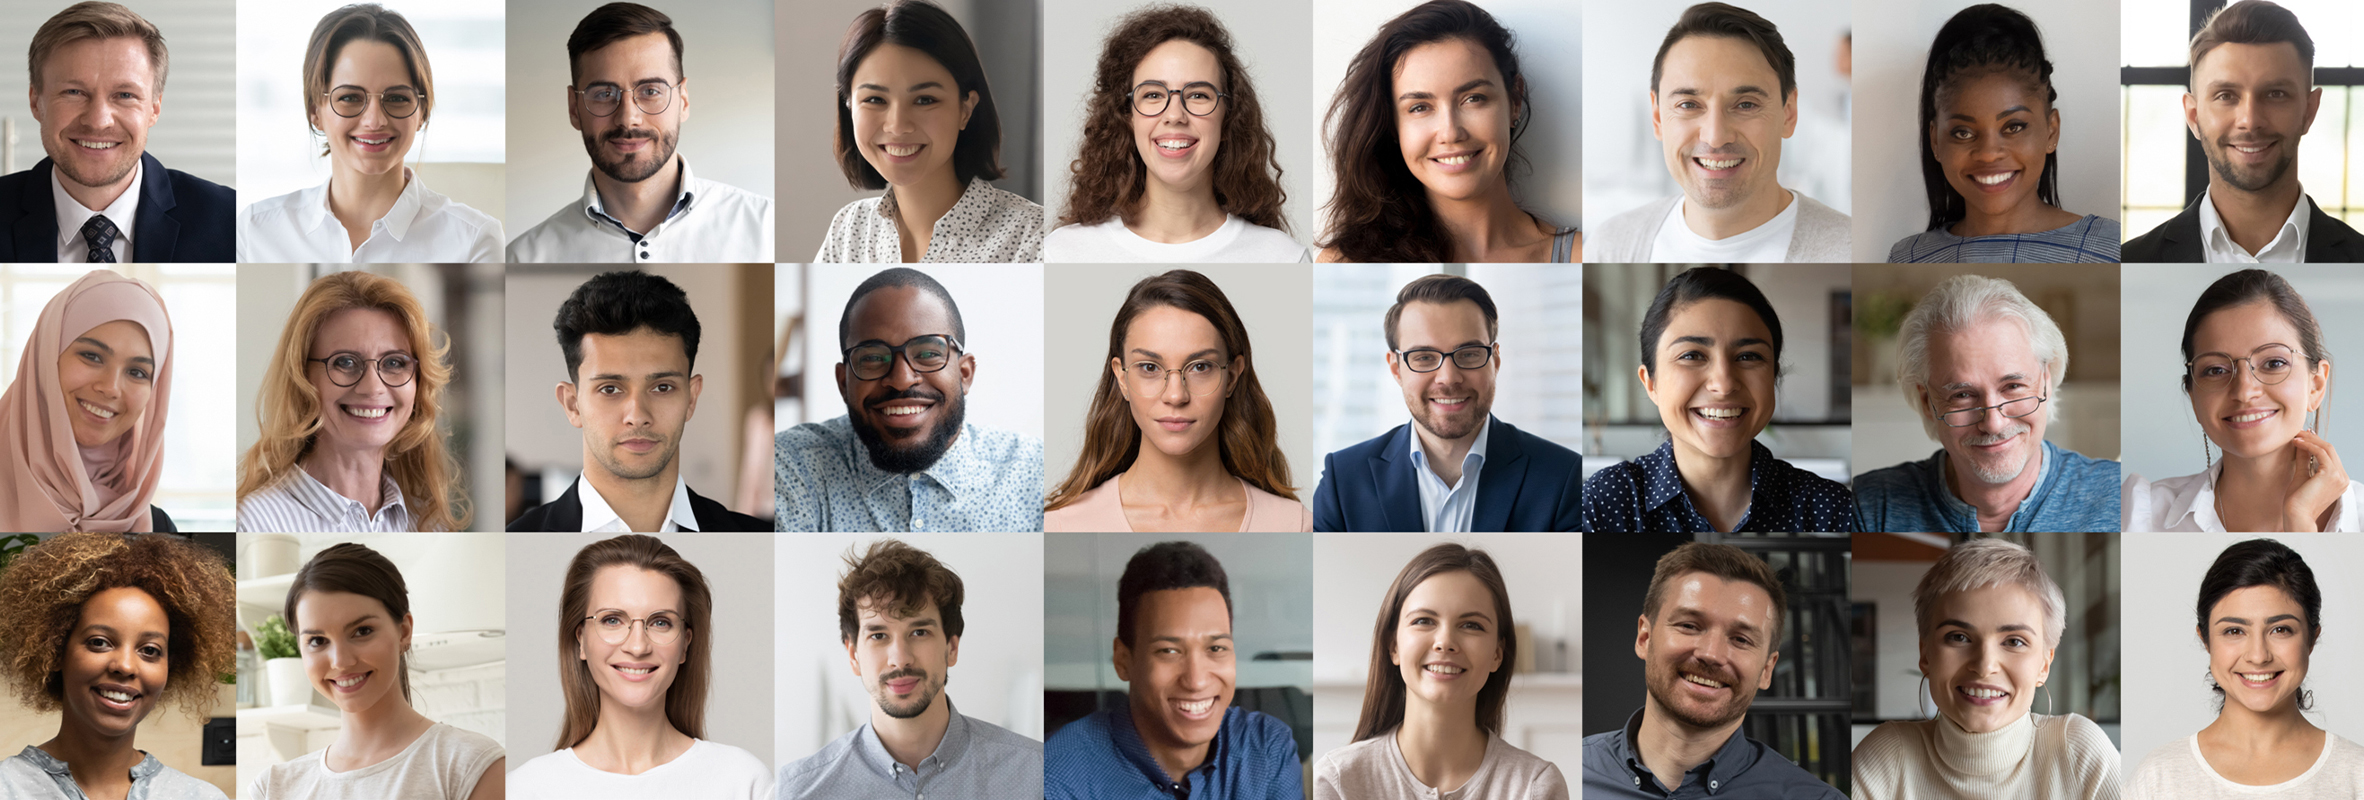 A diverse group of credit union members smile for the camera, showing their different identities, cultures, and beliefs.